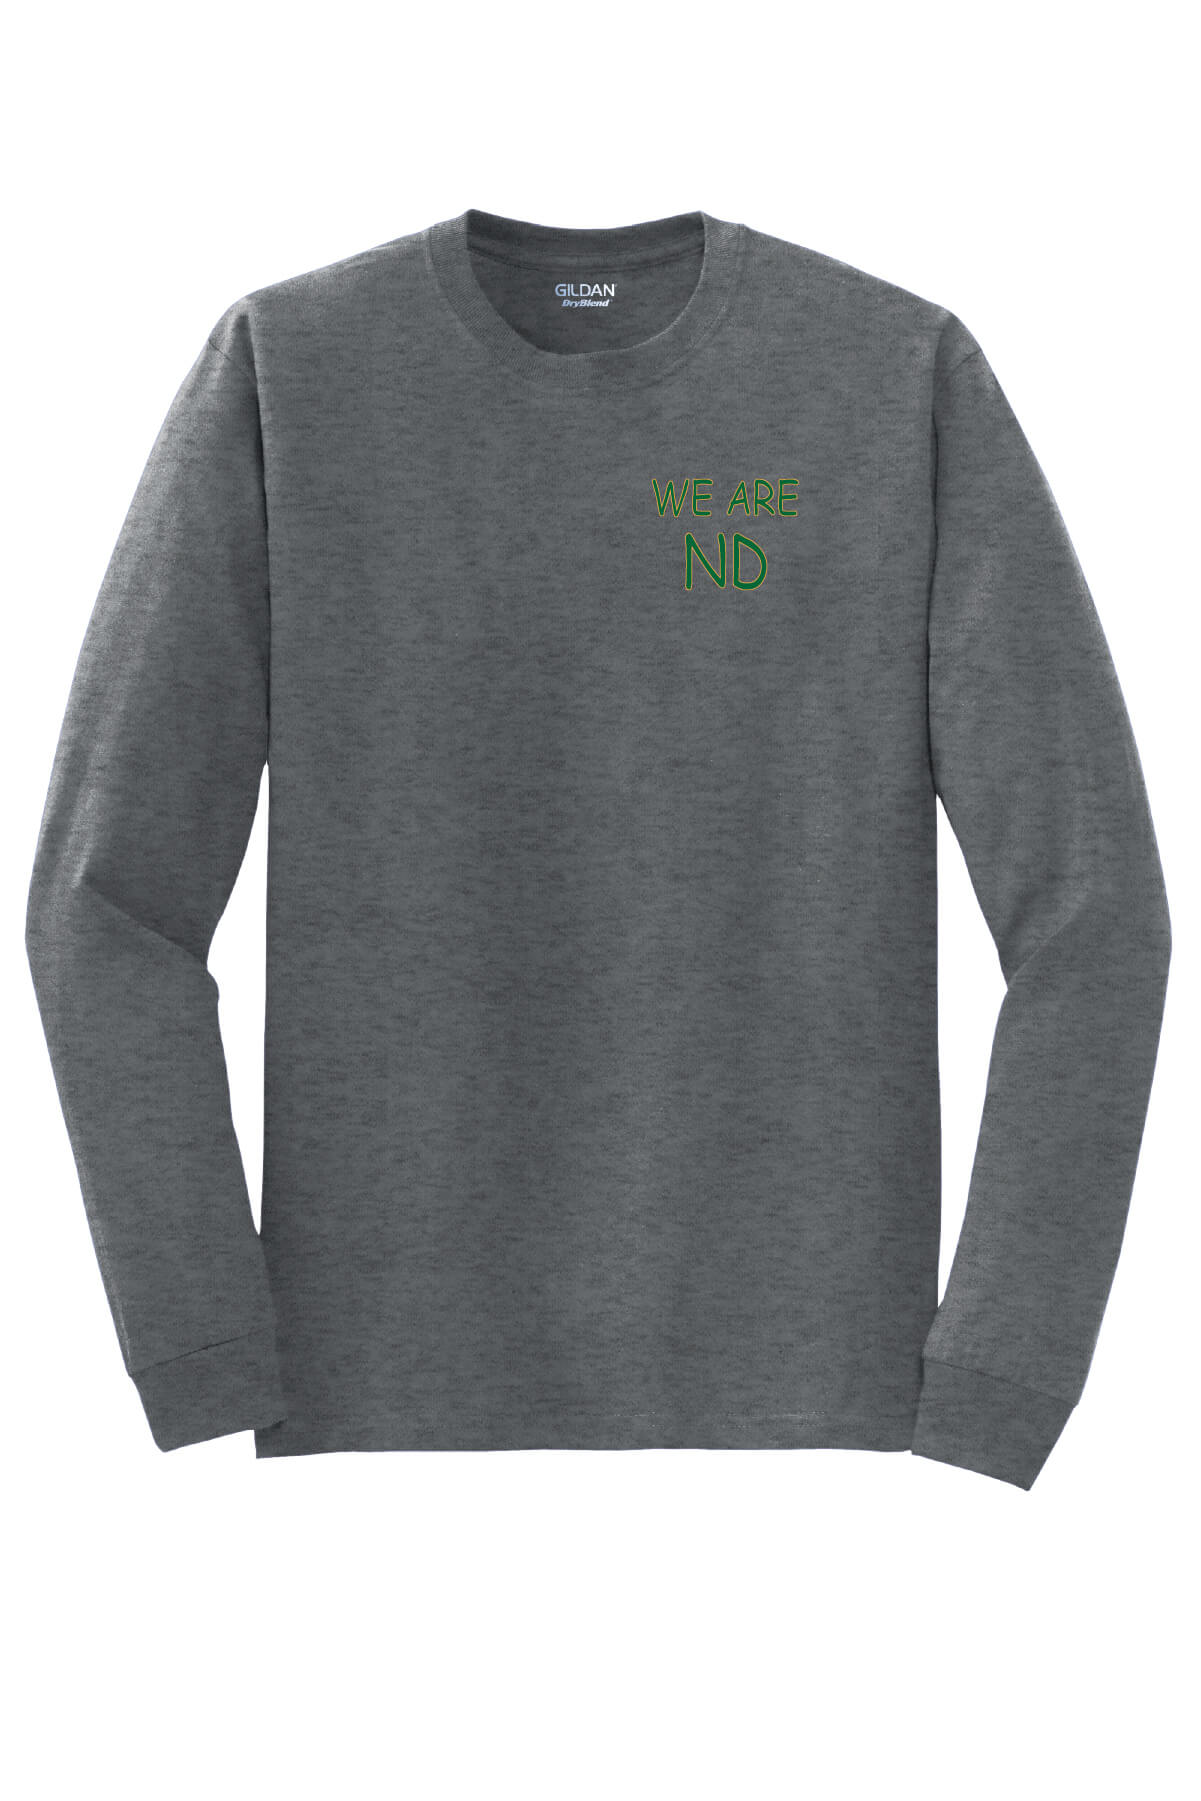 We Are ND Long Sleeve T-Shirt front-gray